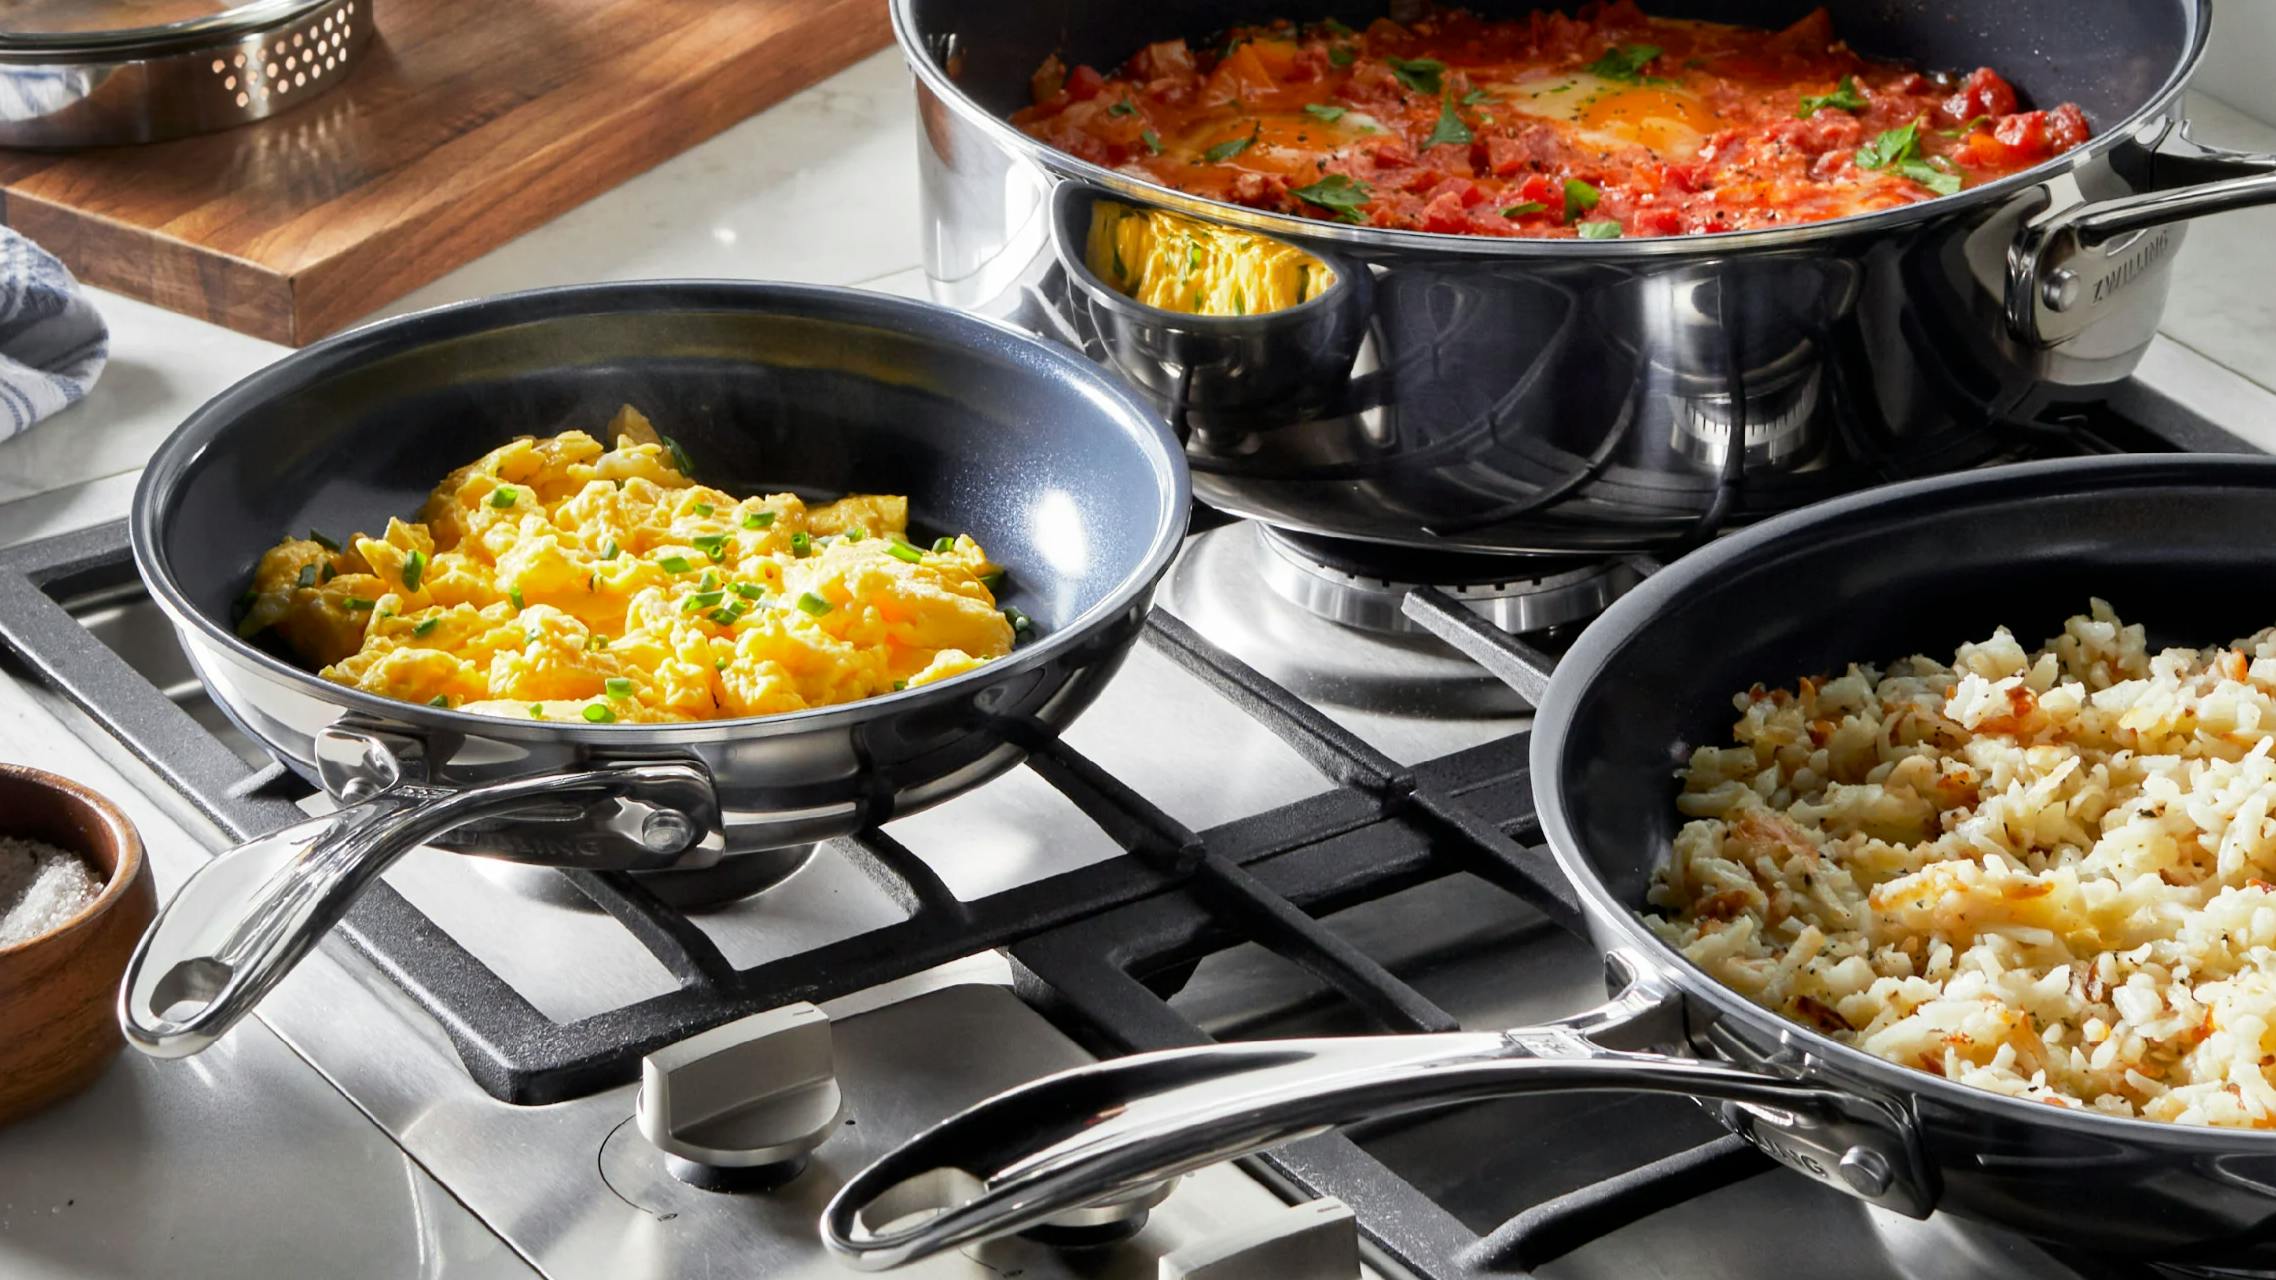 The Zwilling Clad CFX Stainless Steel Ceramic Nonstick Cookware Set · 10-Piece Set. The pans are on the stove with food in them. 